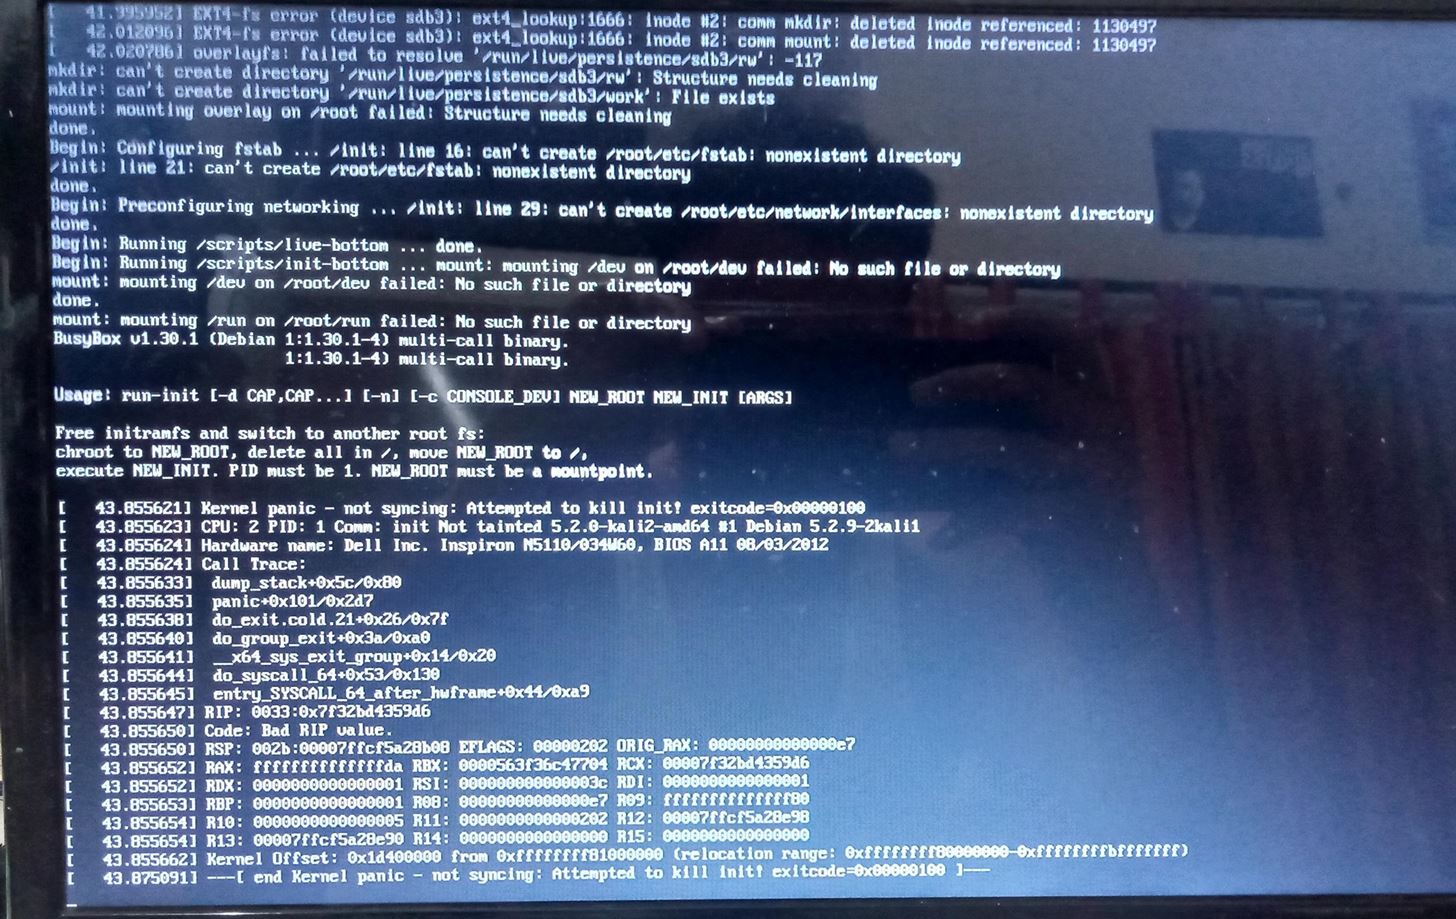 kali linux iso file not usb bootable